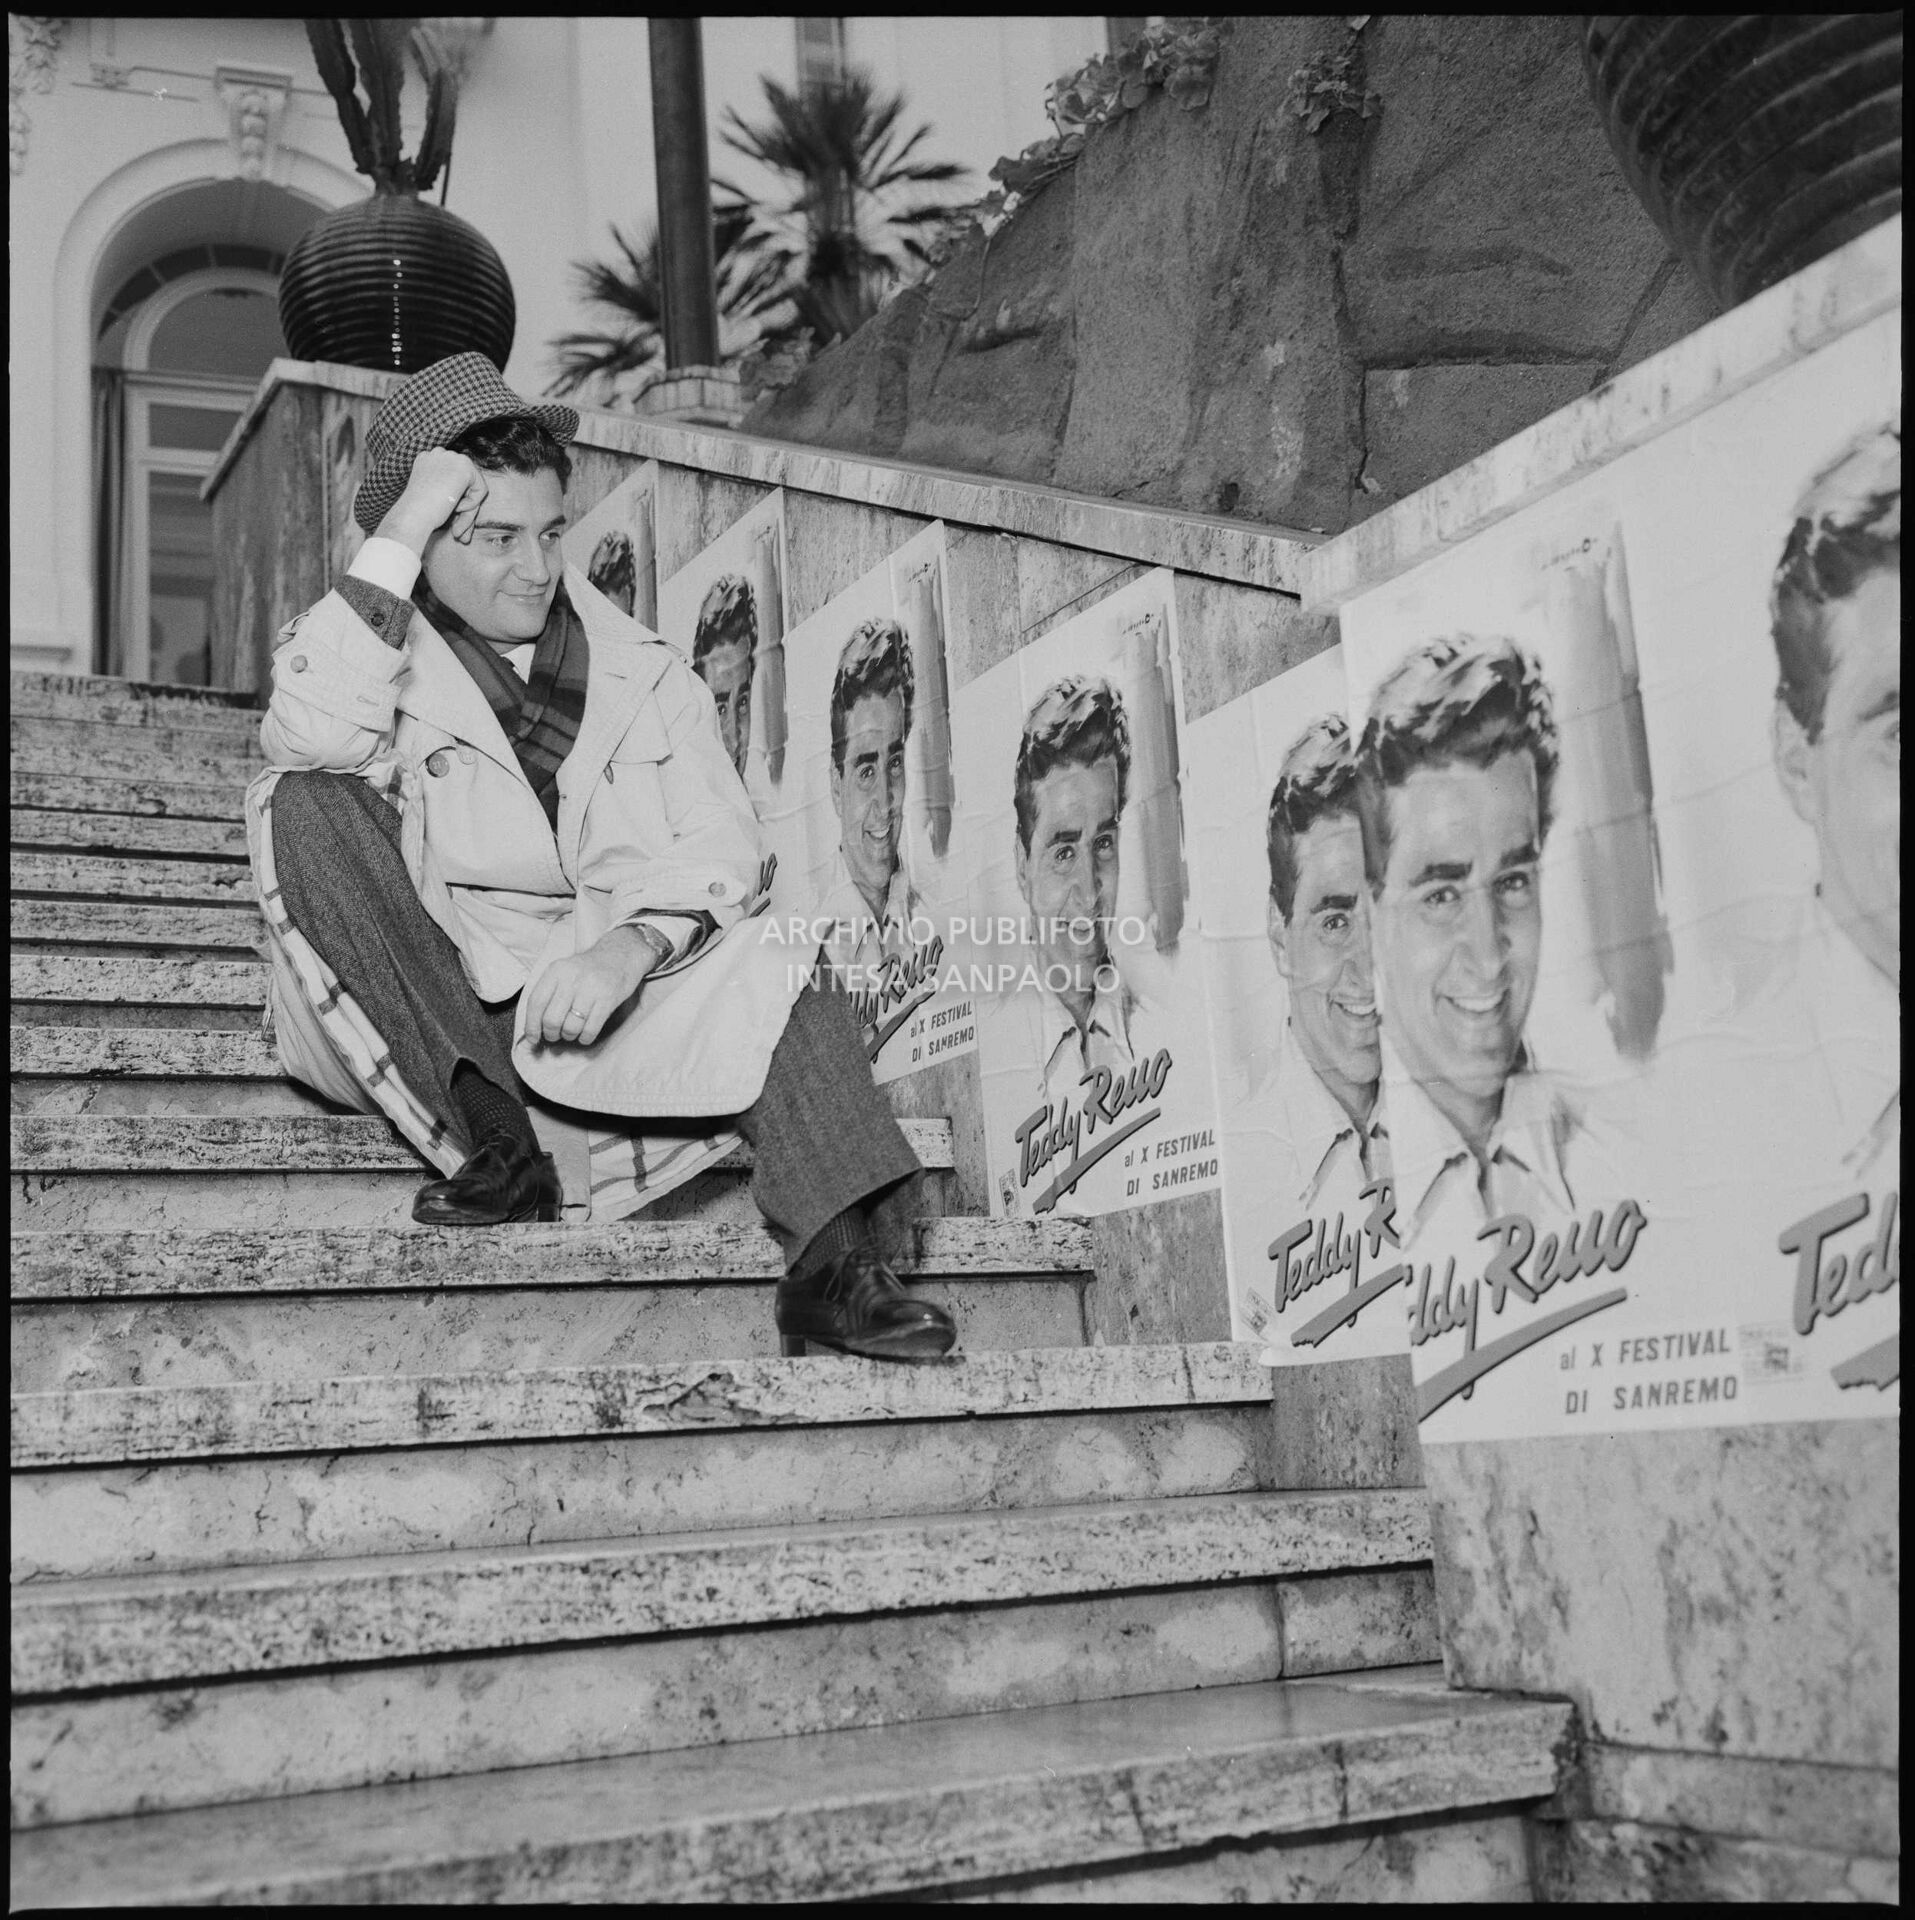 Teddy Reno posing on the Casino steps next to promotional posters featuring him during the 10th Sanremo Festival